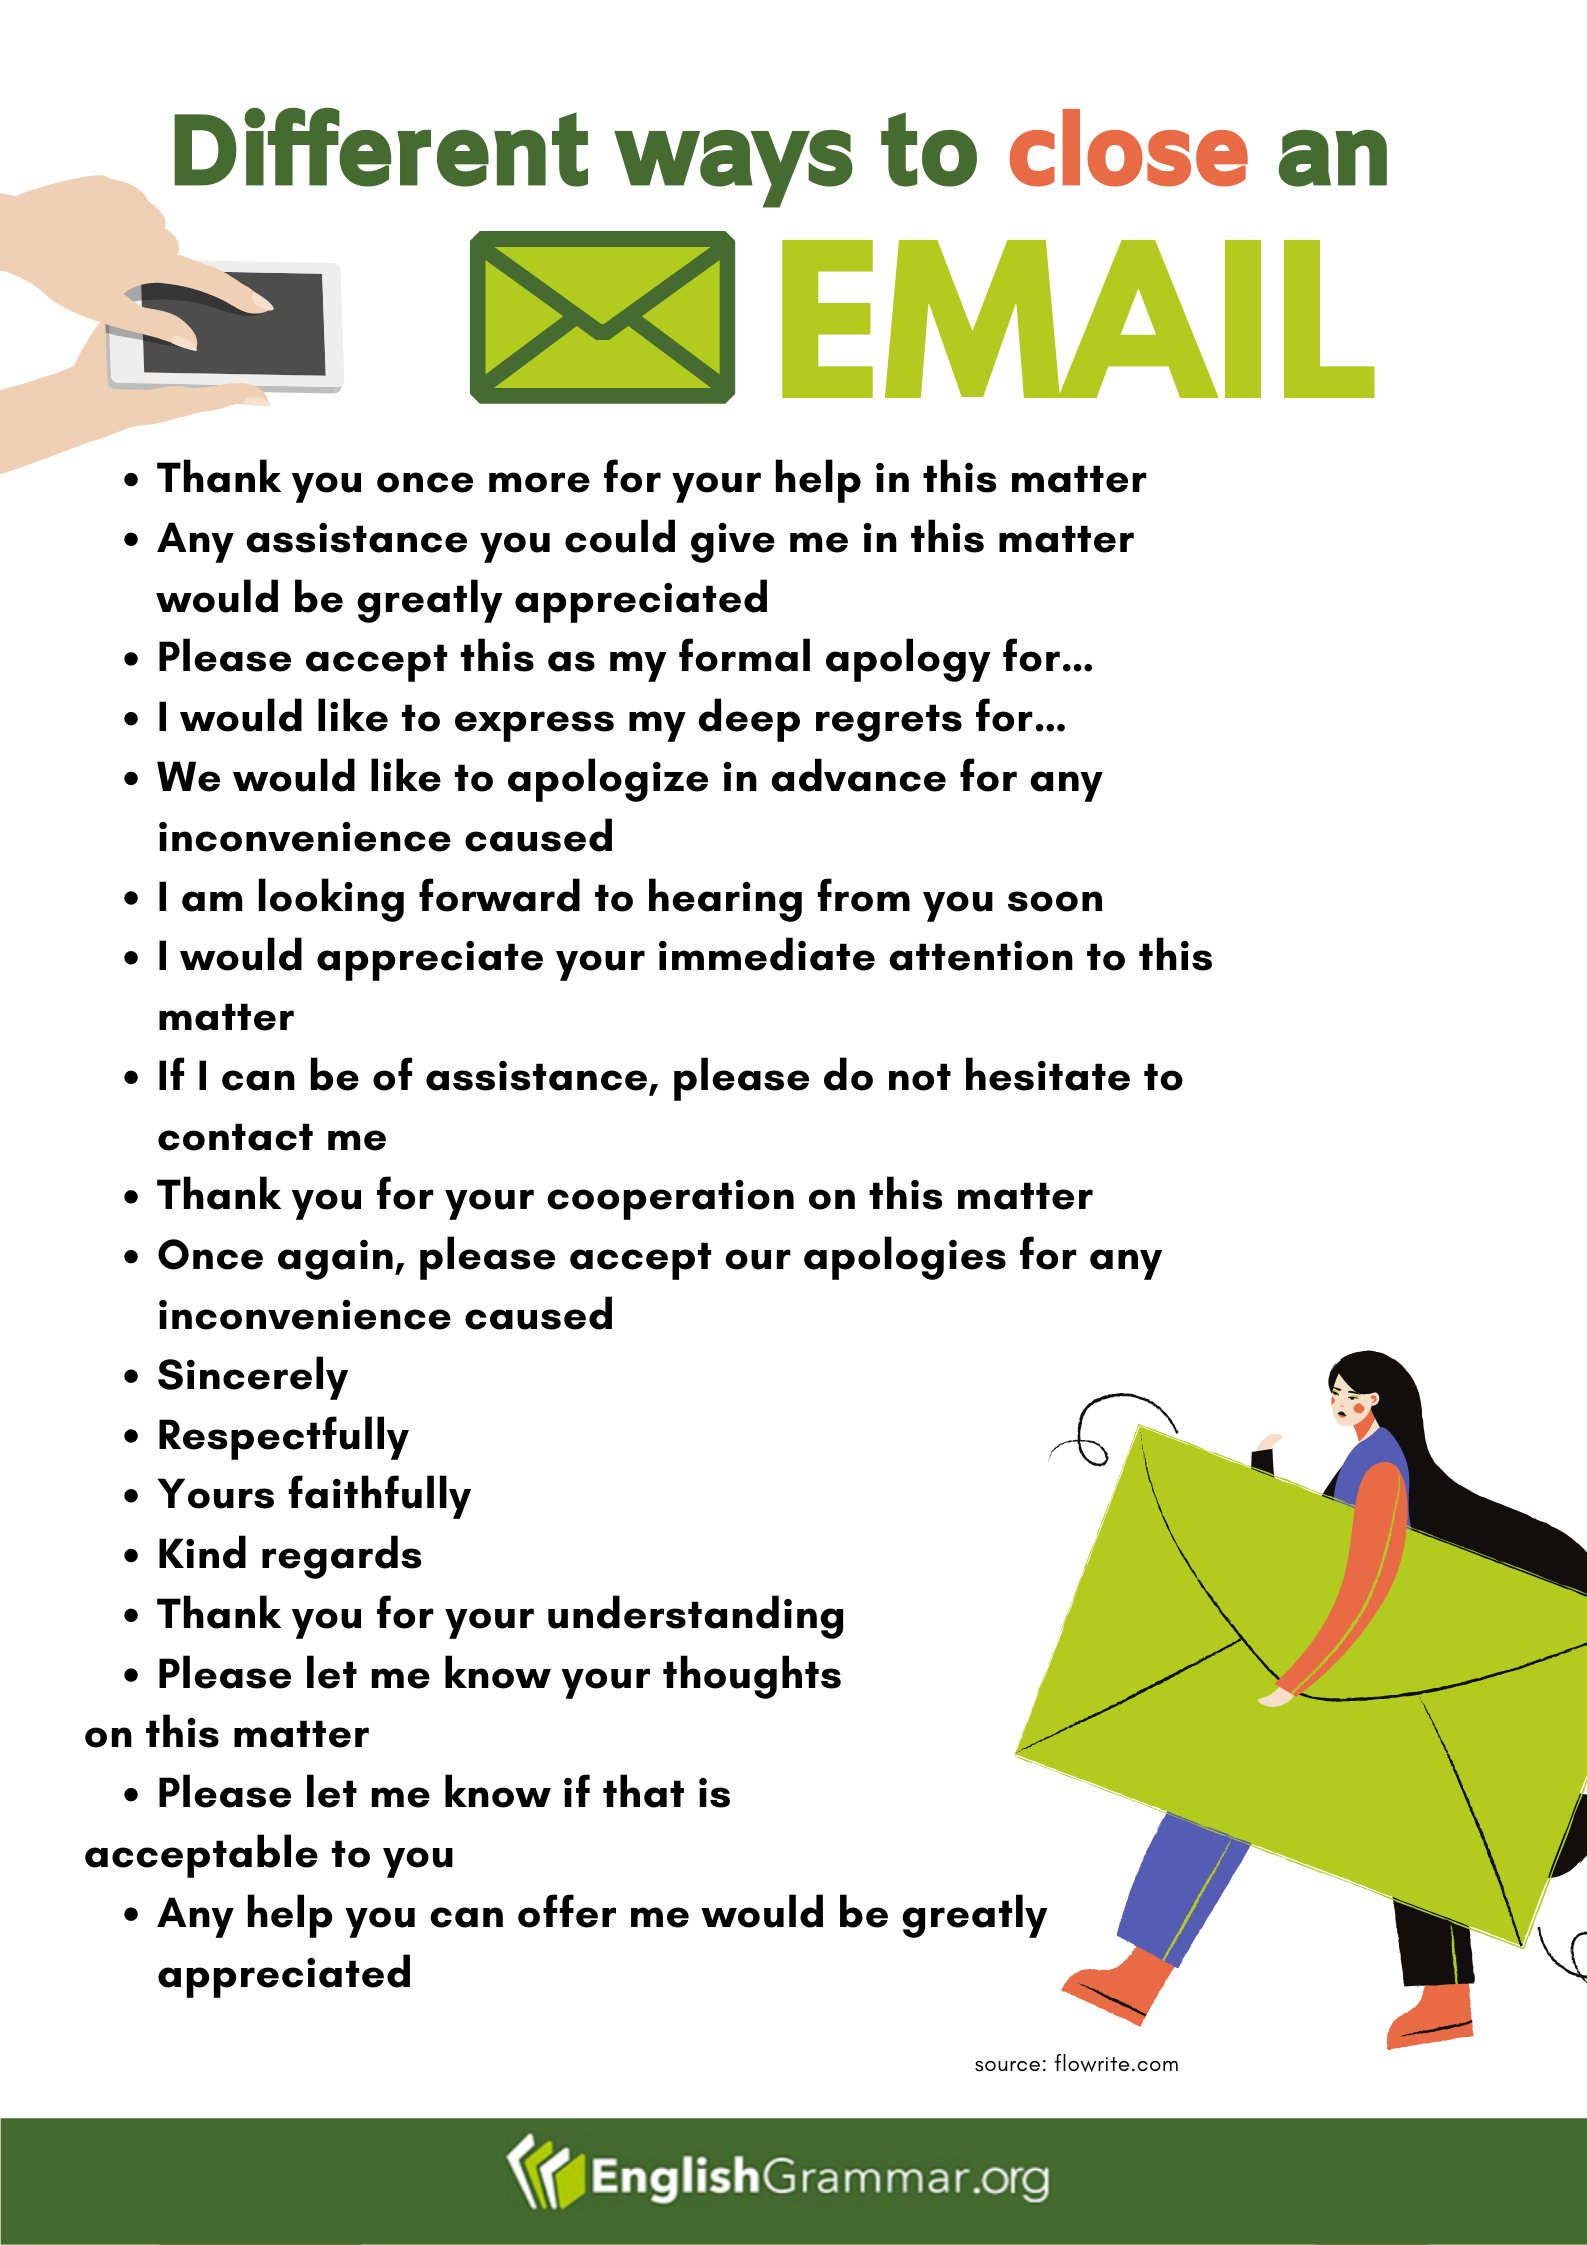 How To Start An Email - 45 Great Ways To Do It